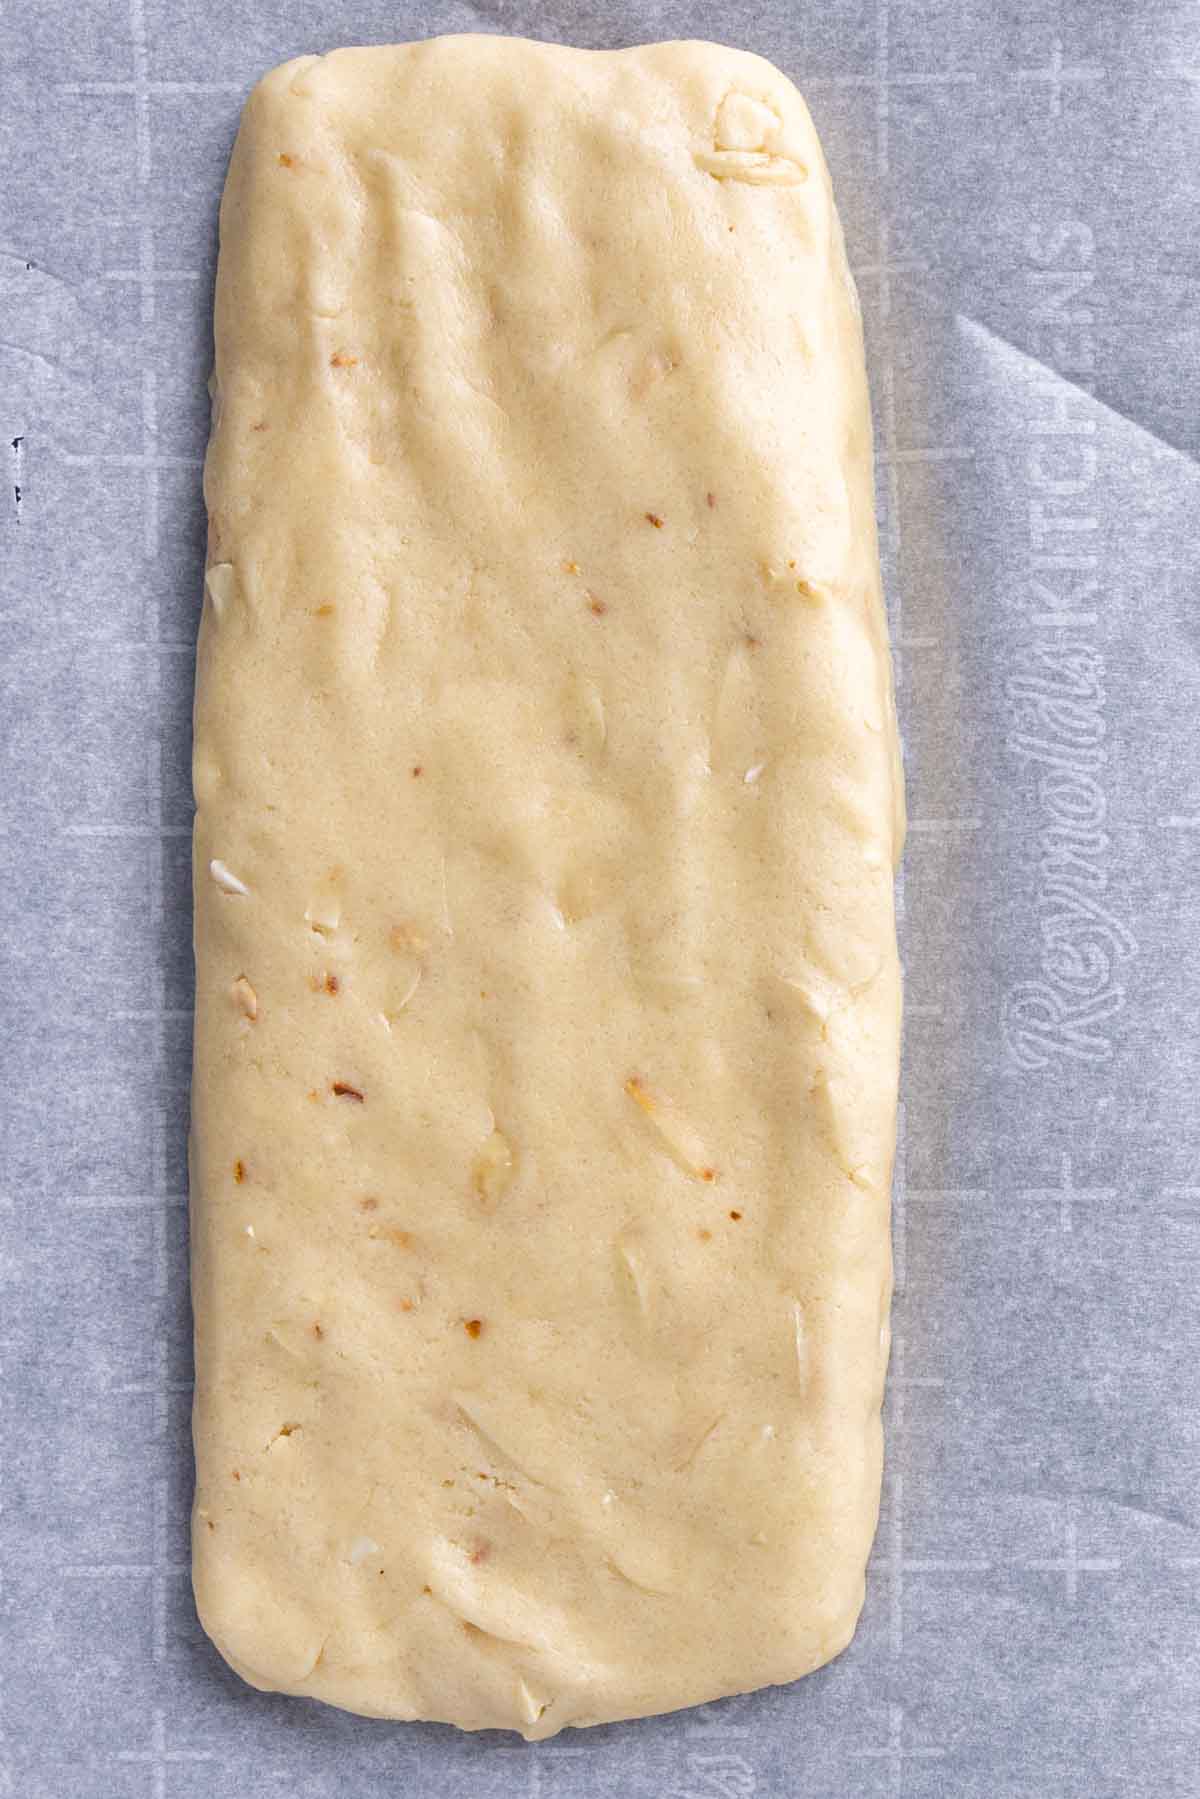 raw almond biscotti dough on parchment paper